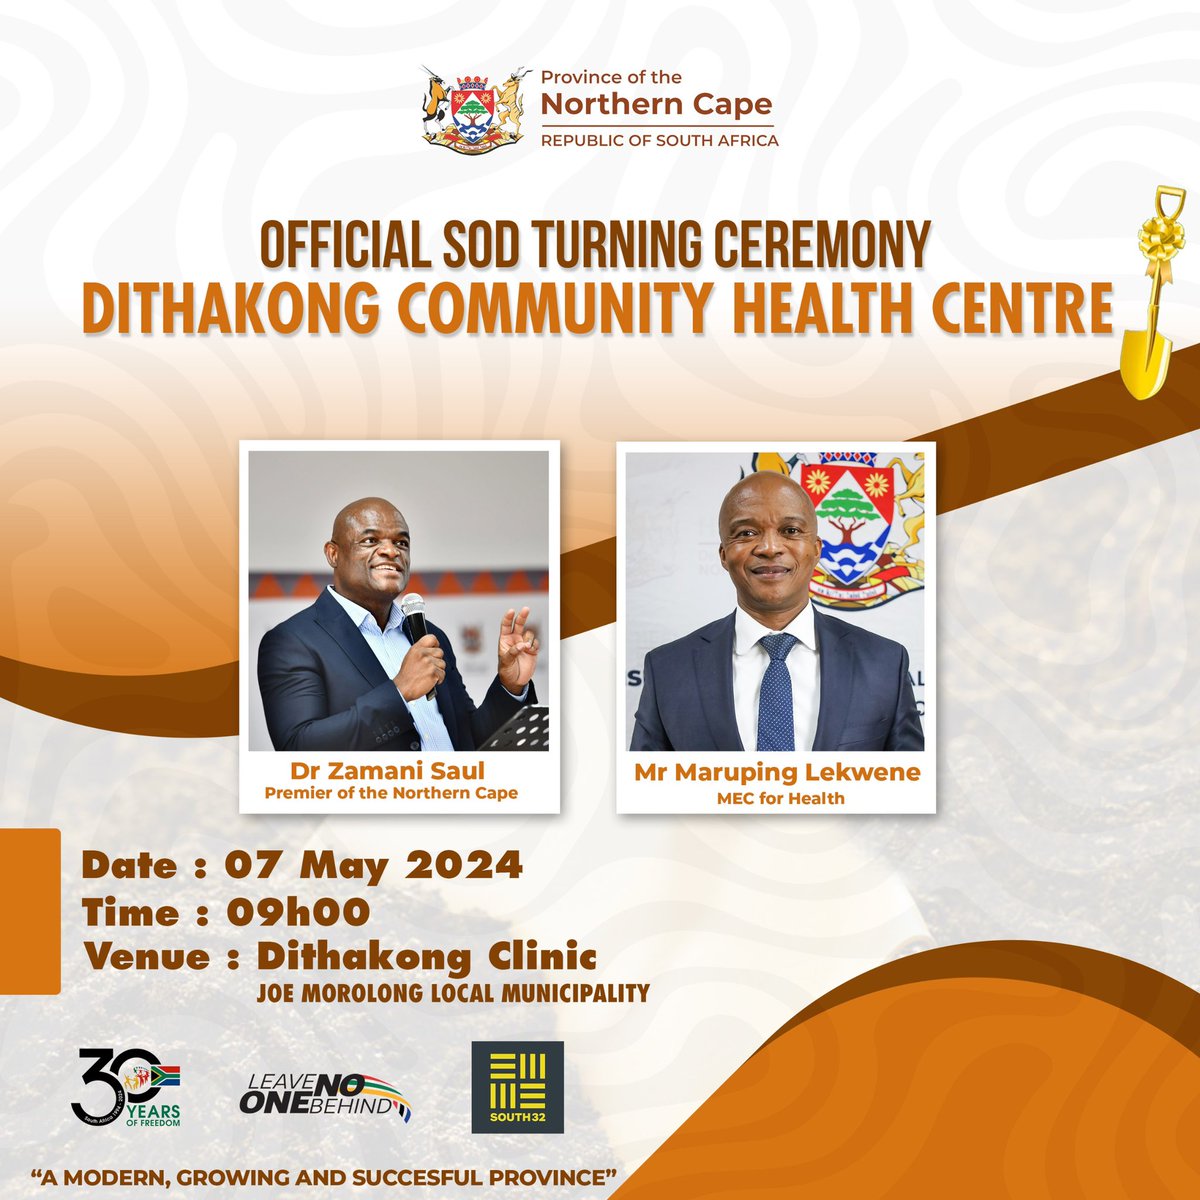 📍[HAPPENING TOMORROW] - SOD-TURNING CEREMONY FOR THE CONSTRUCTION OF THE NEW COMMUNITY HEALTH CENTRE IN DITHAKONG, JOE MOROLONG LOCAL MUNICIPALITY. 

#moderngrowingsuccessfulprovince
#northerncape
#NCDOH2024